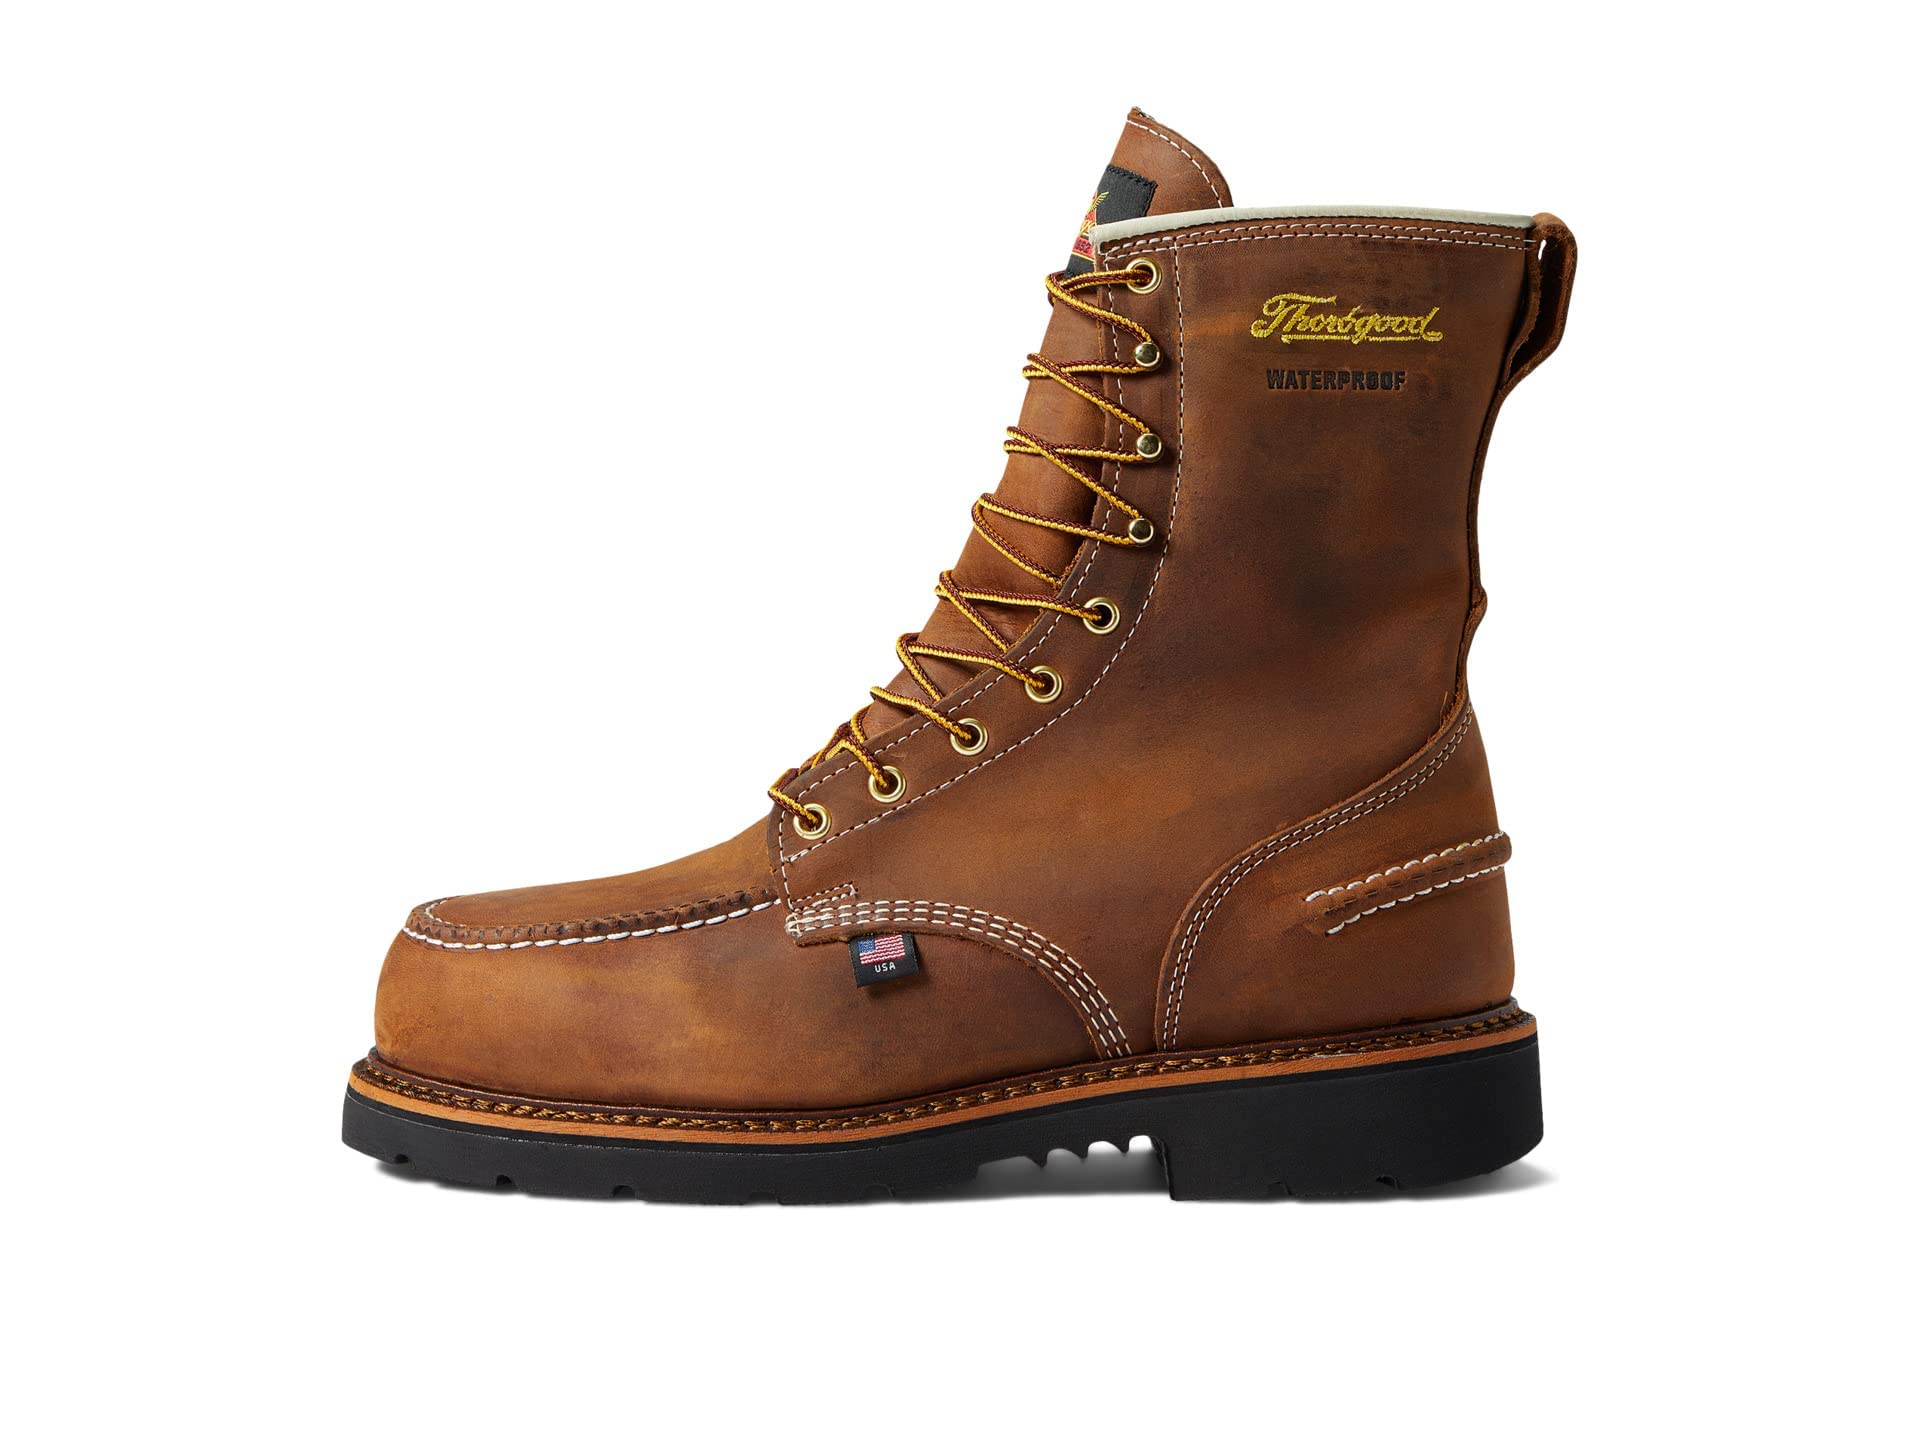 Thorogood 1957 Series 8” Waterproof Steel Toe Work Boots for Men - Full-Grain Leather with Moc Toe, Slip-Resistant Heel Outsole, and Comfort Insole; EH Rated